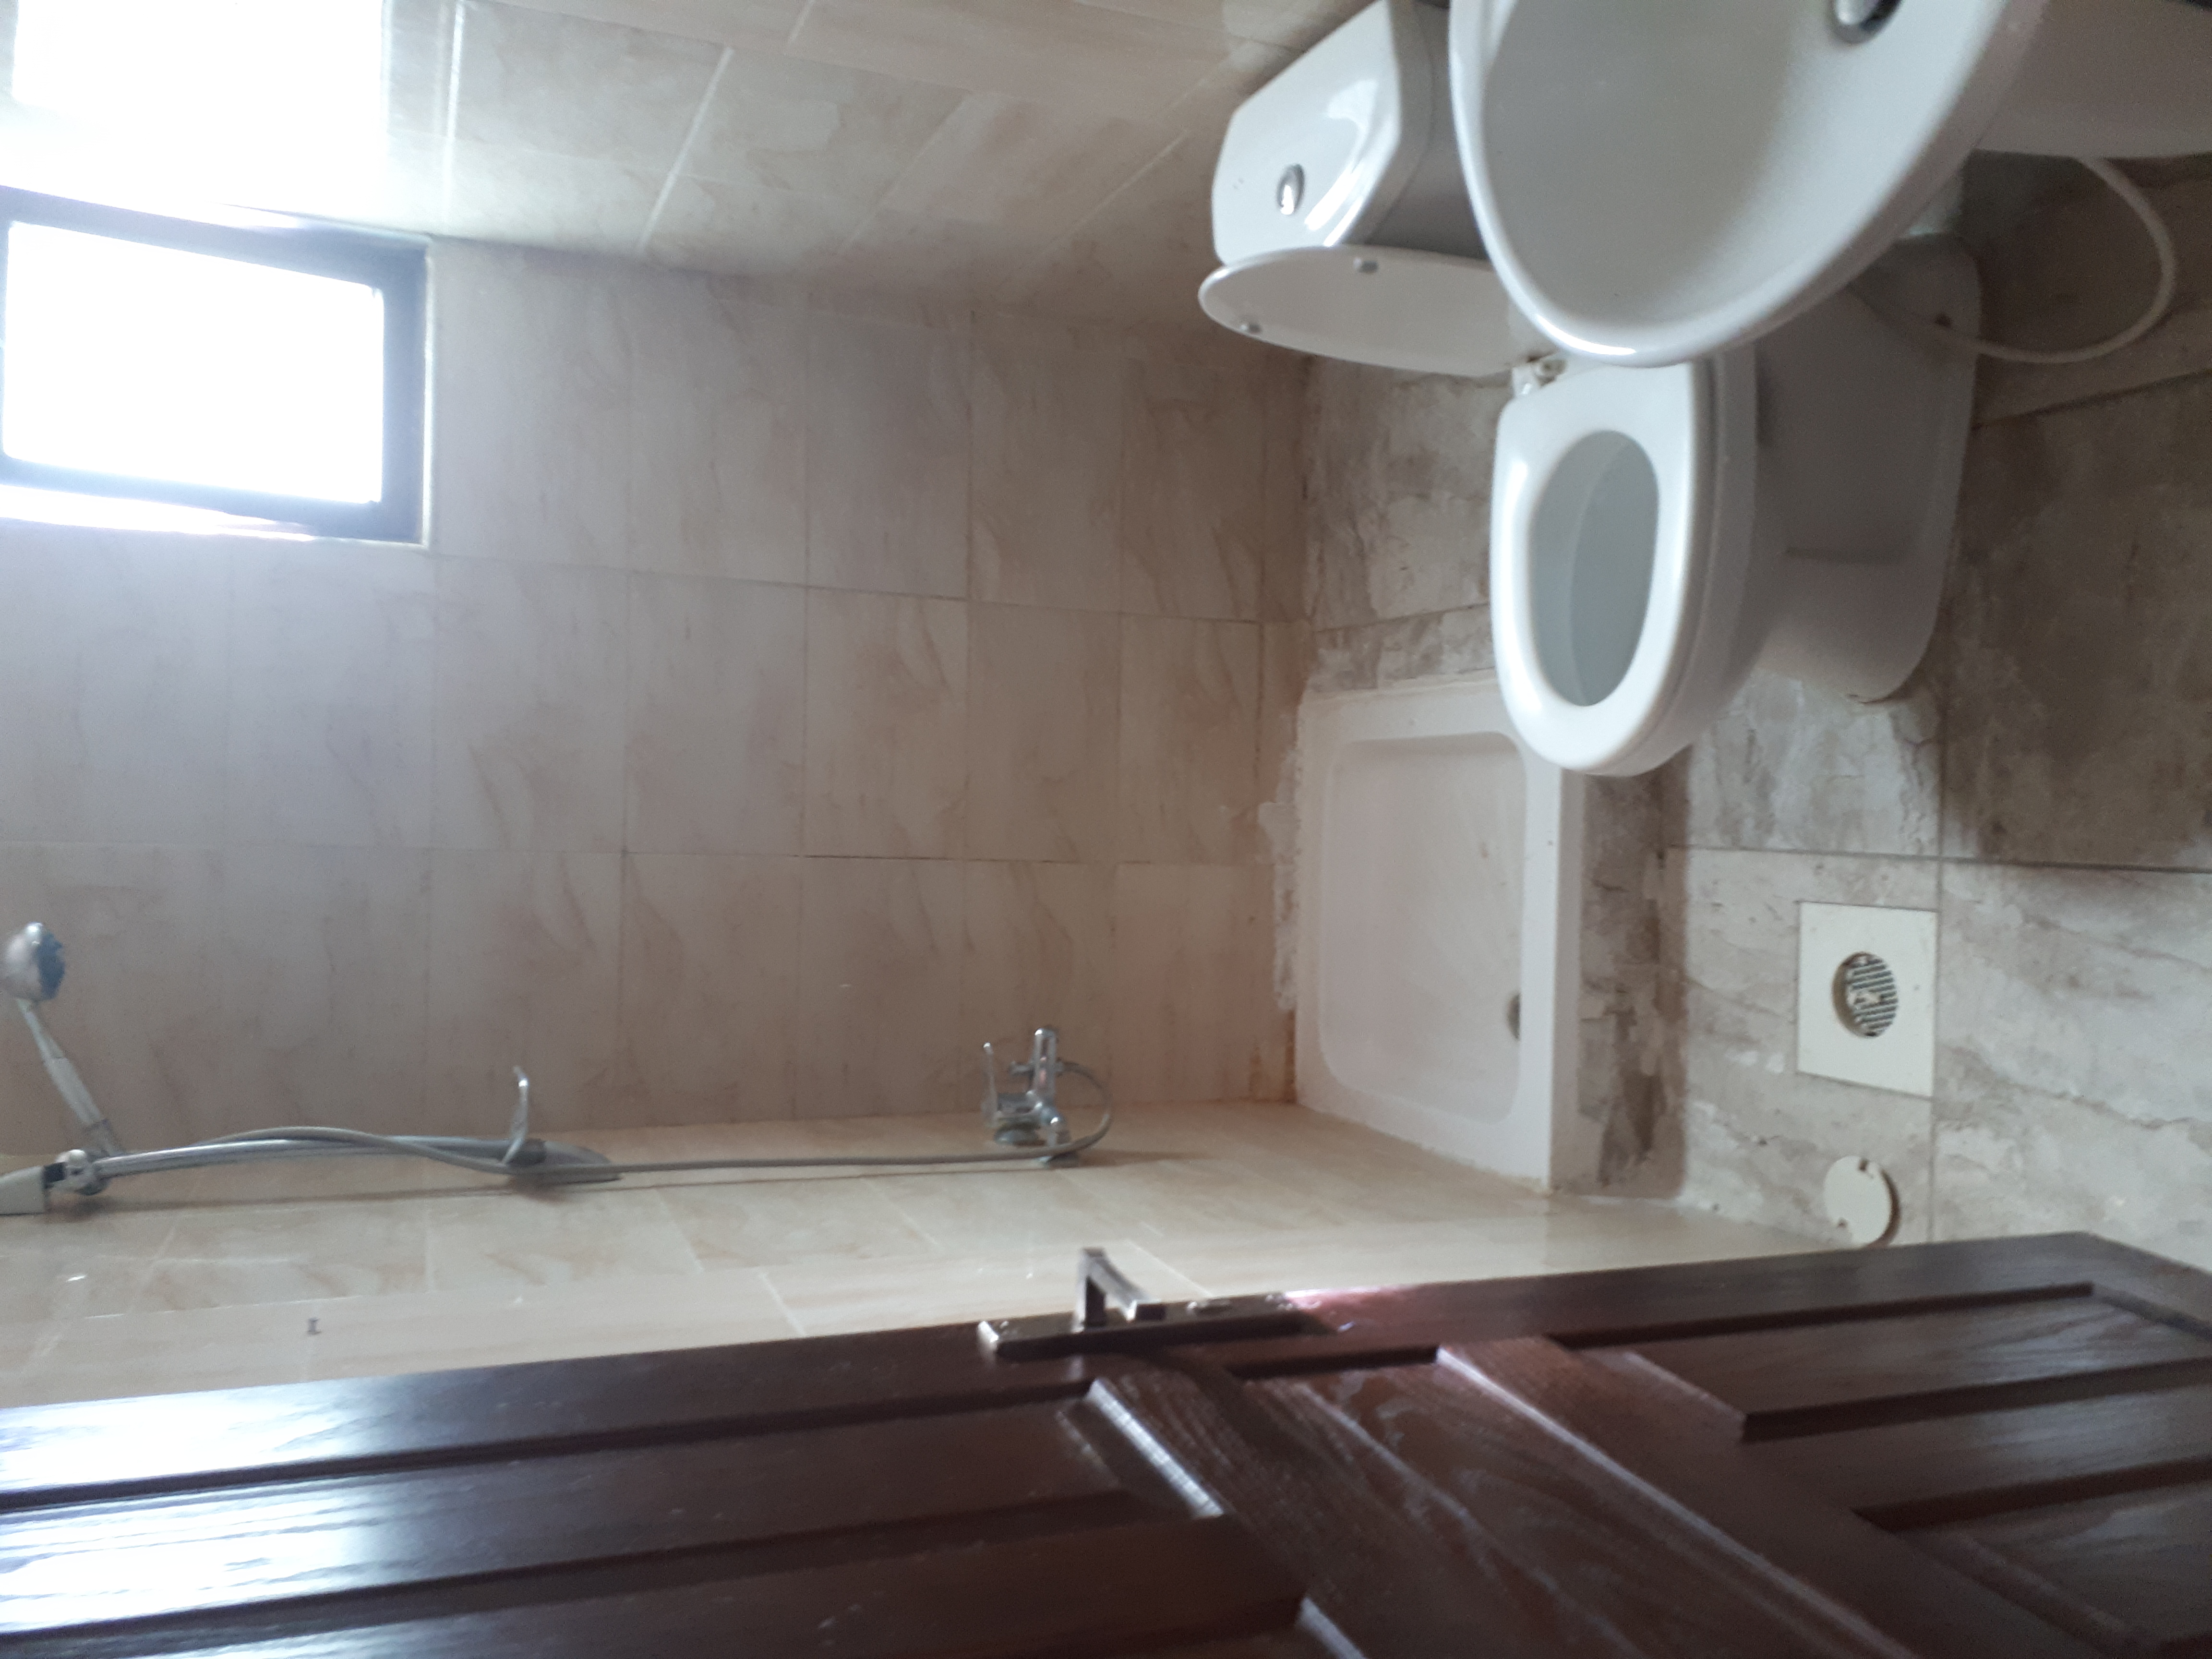 Fully Furnished Studio with Beautiful Kitchen & Bathroom close to Technical Collage-  شقه فارغه في الجندويل...